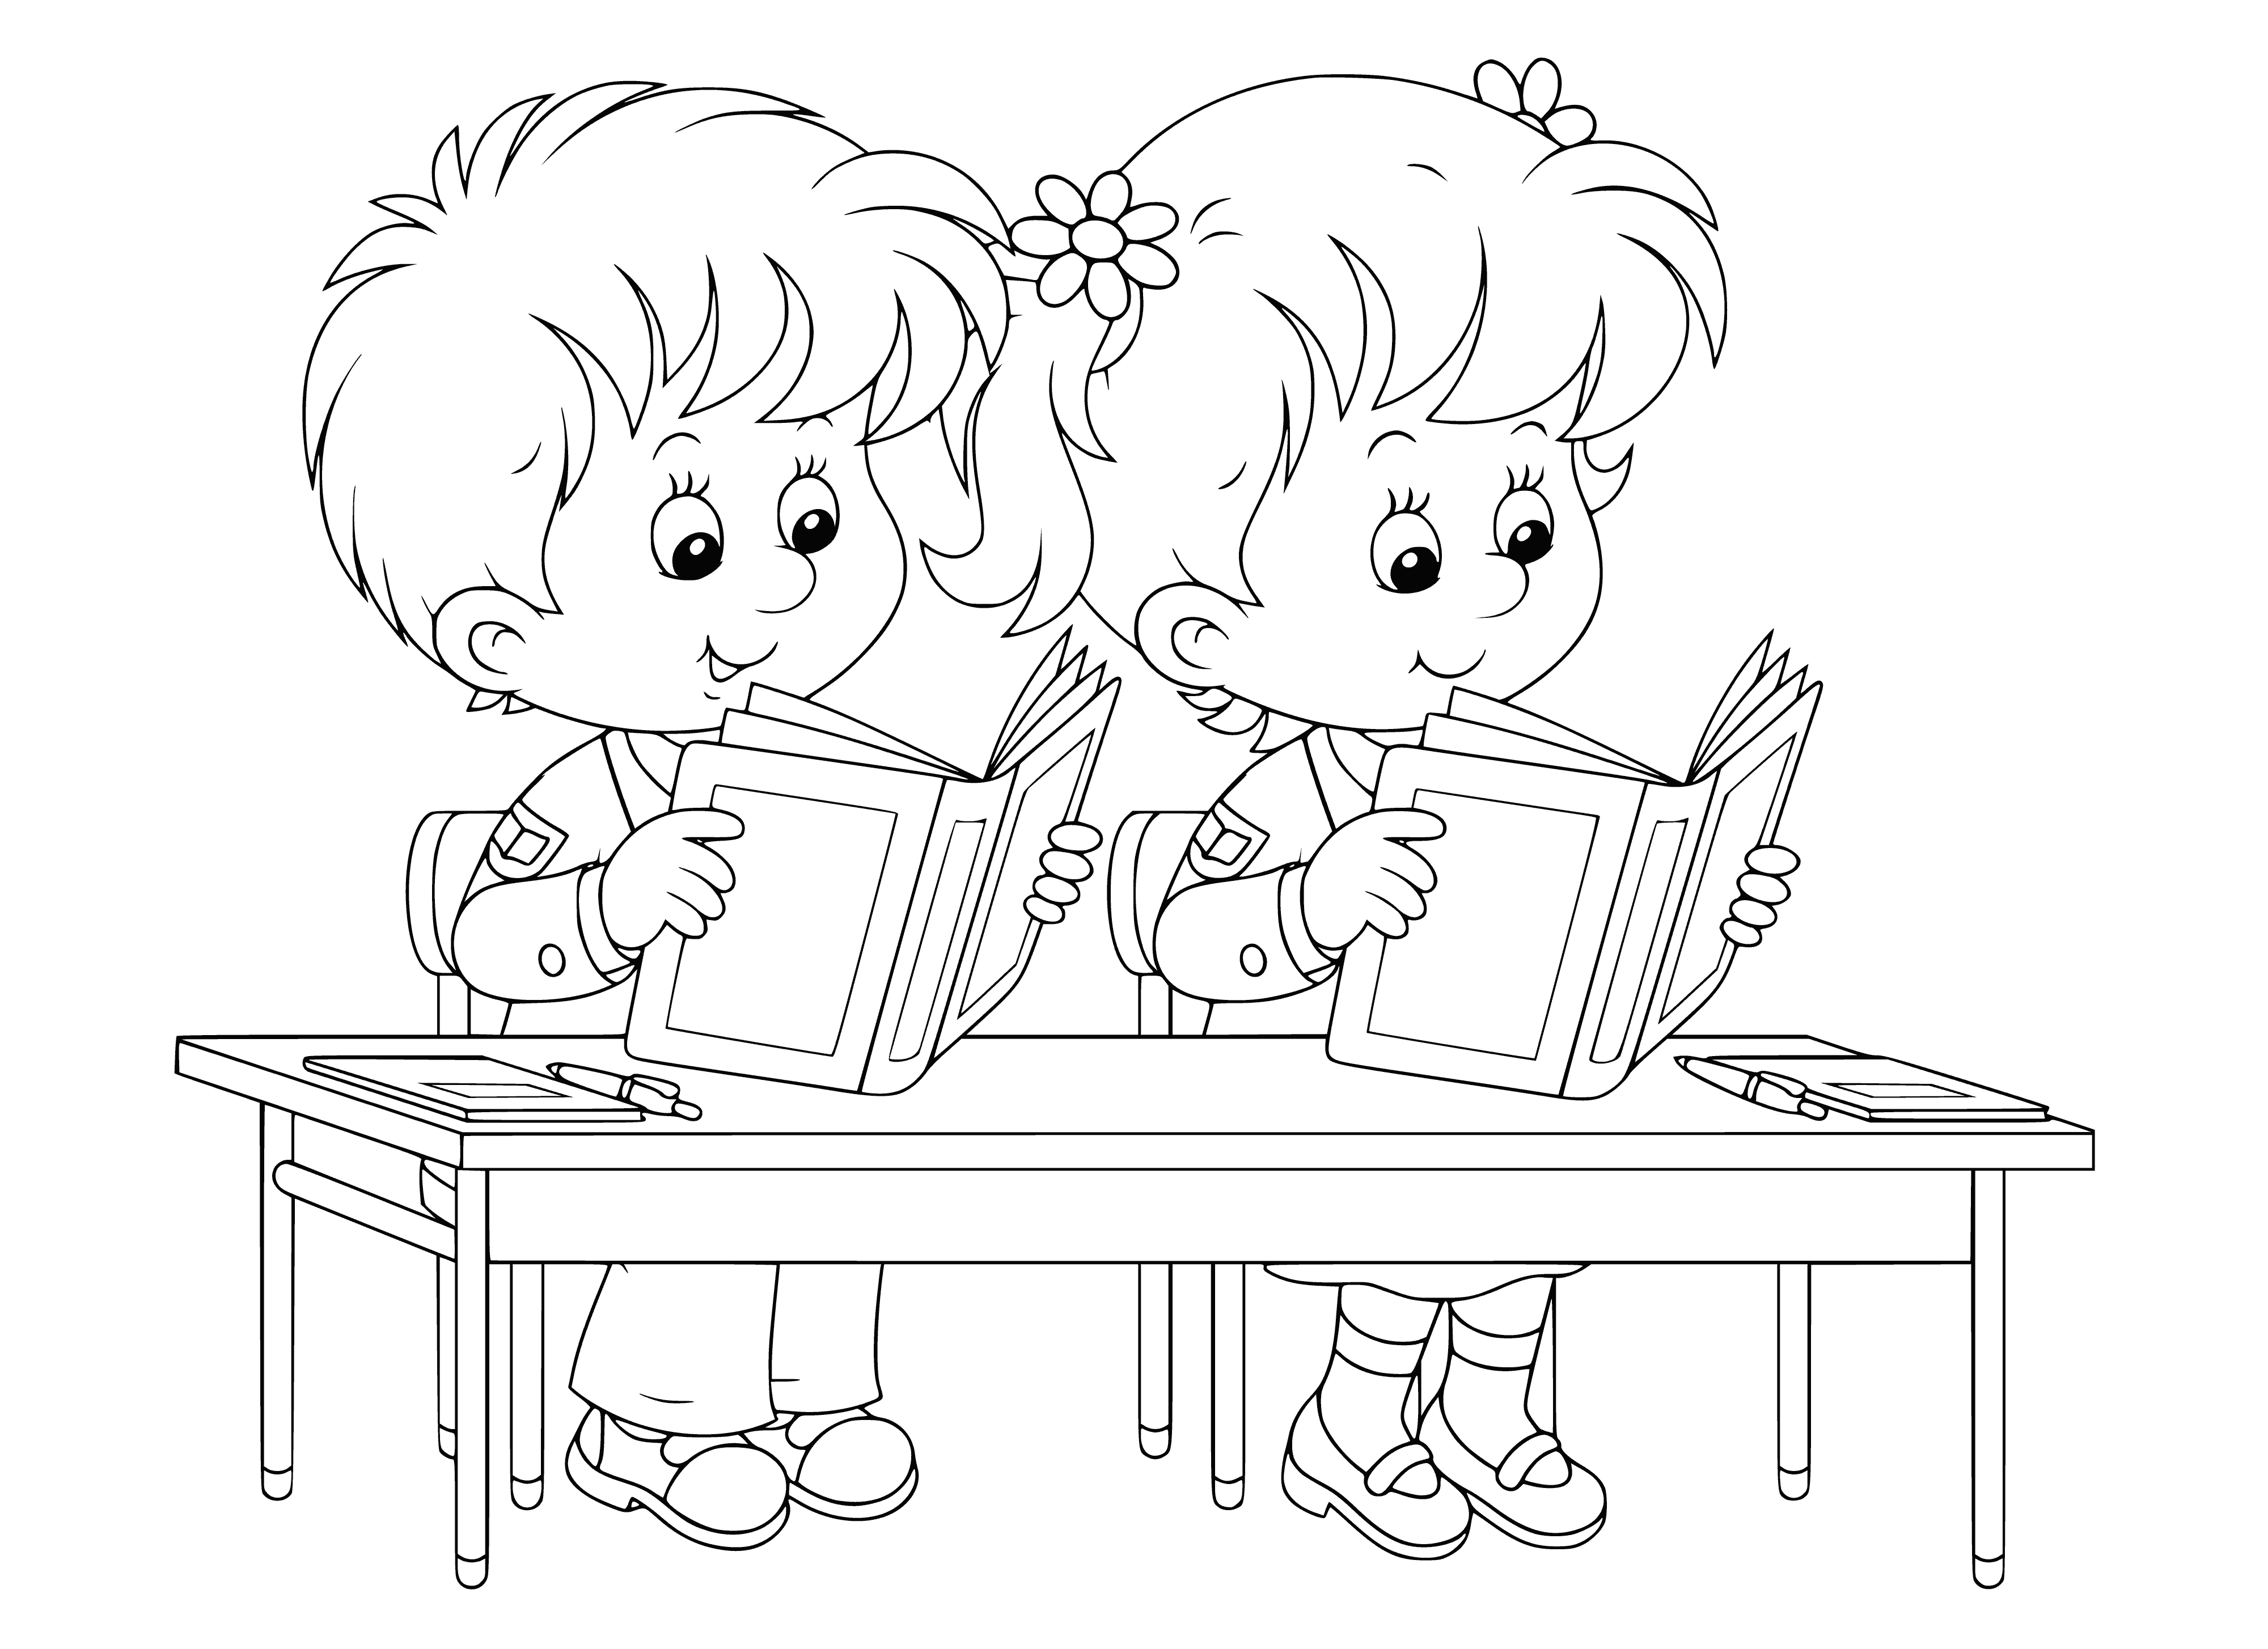 coloring page: Pupils excited to learn in a school, teacher guiding them on their journey of knowledge and growth. #education #learning #growth